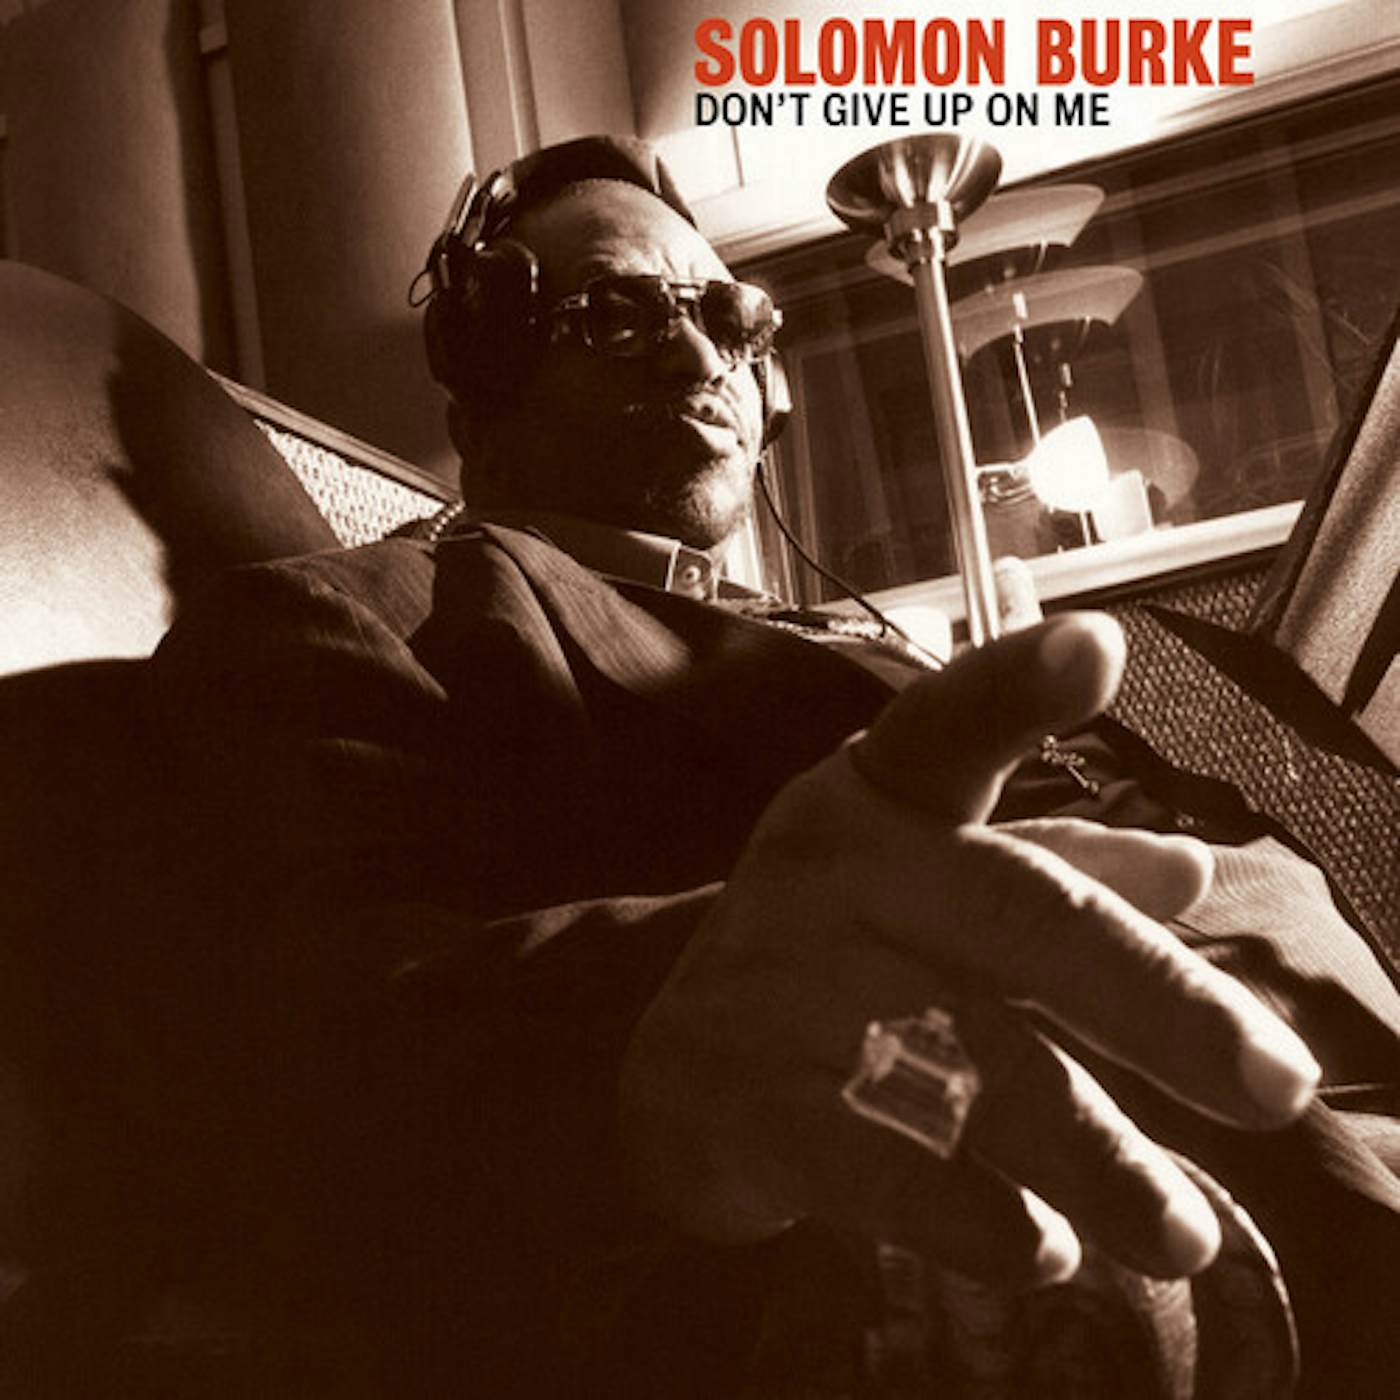 Solomon Burke DON'T GIVE UP ON ME - ANNIVERSARY EDITION CD